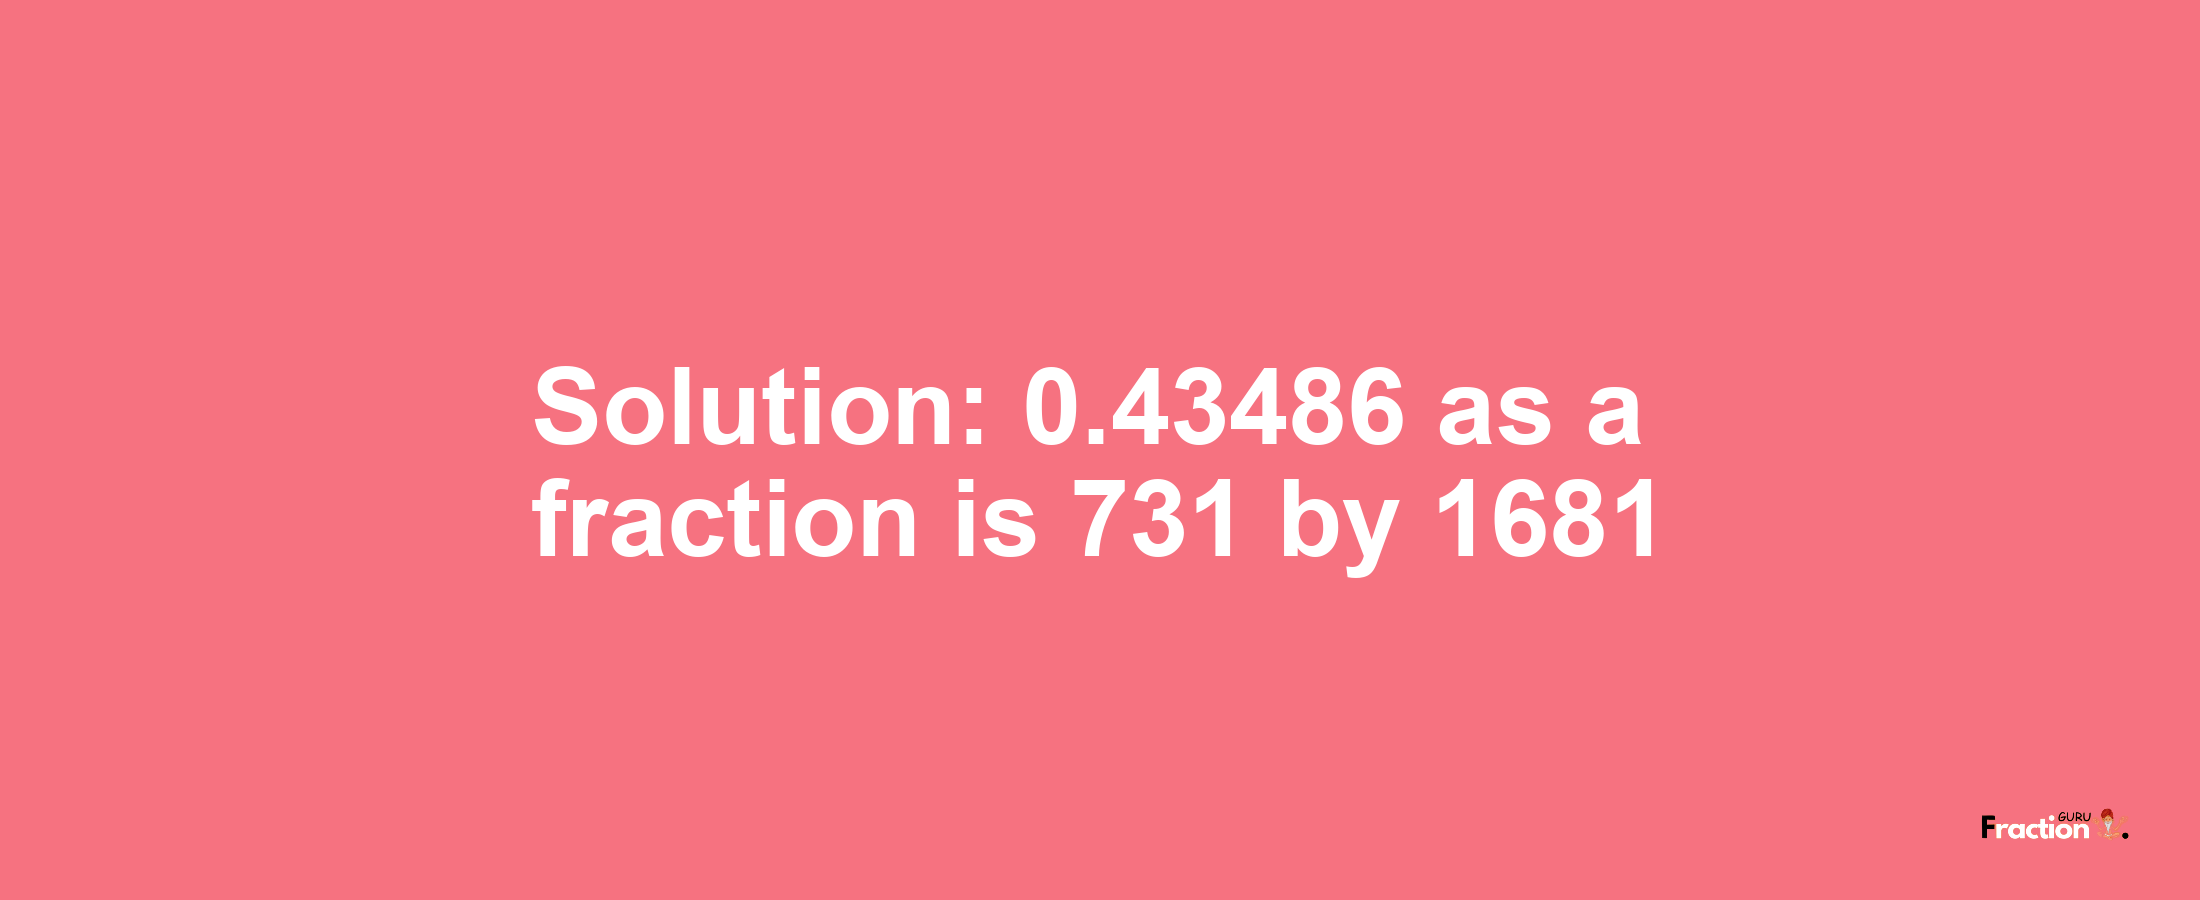 Solution:0.43486 as a fraction is 731/1681